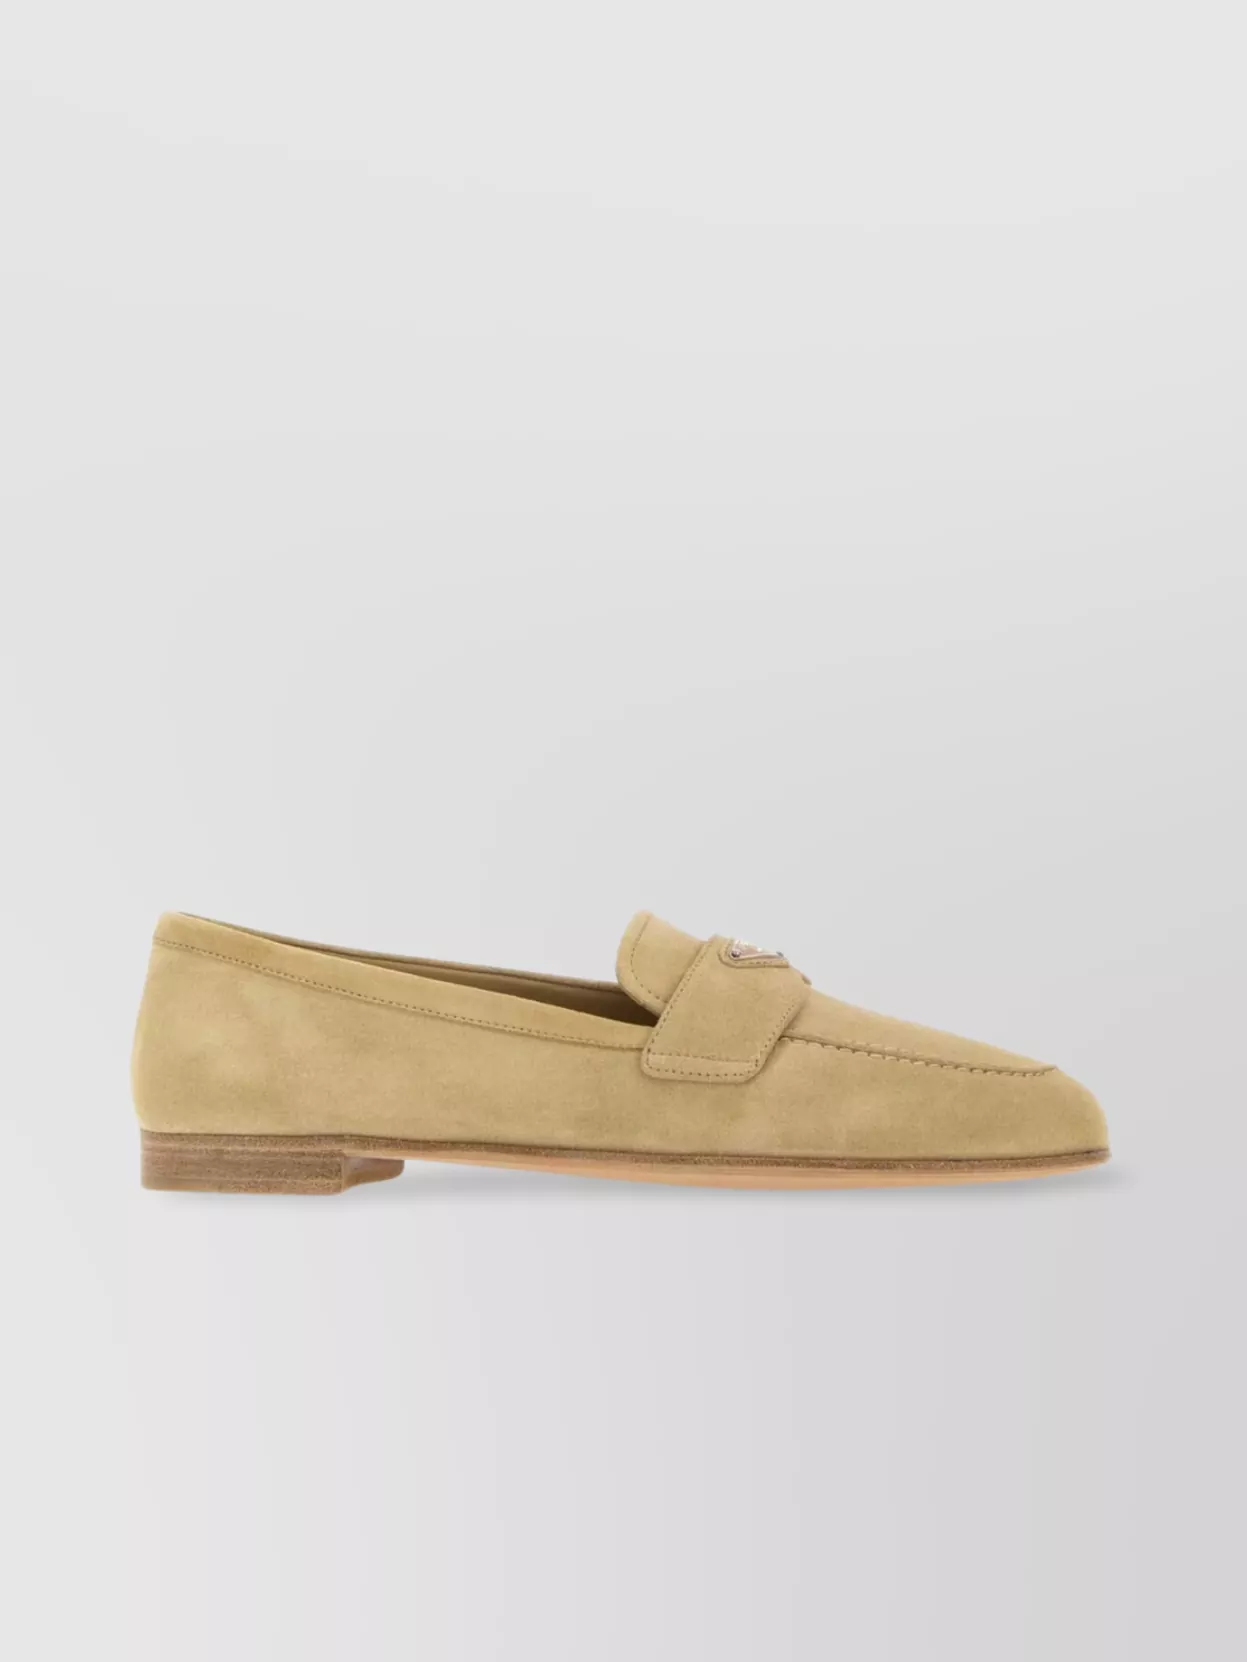 Prada Suede Loafers With Almond Toe Shape And Tassel Detail